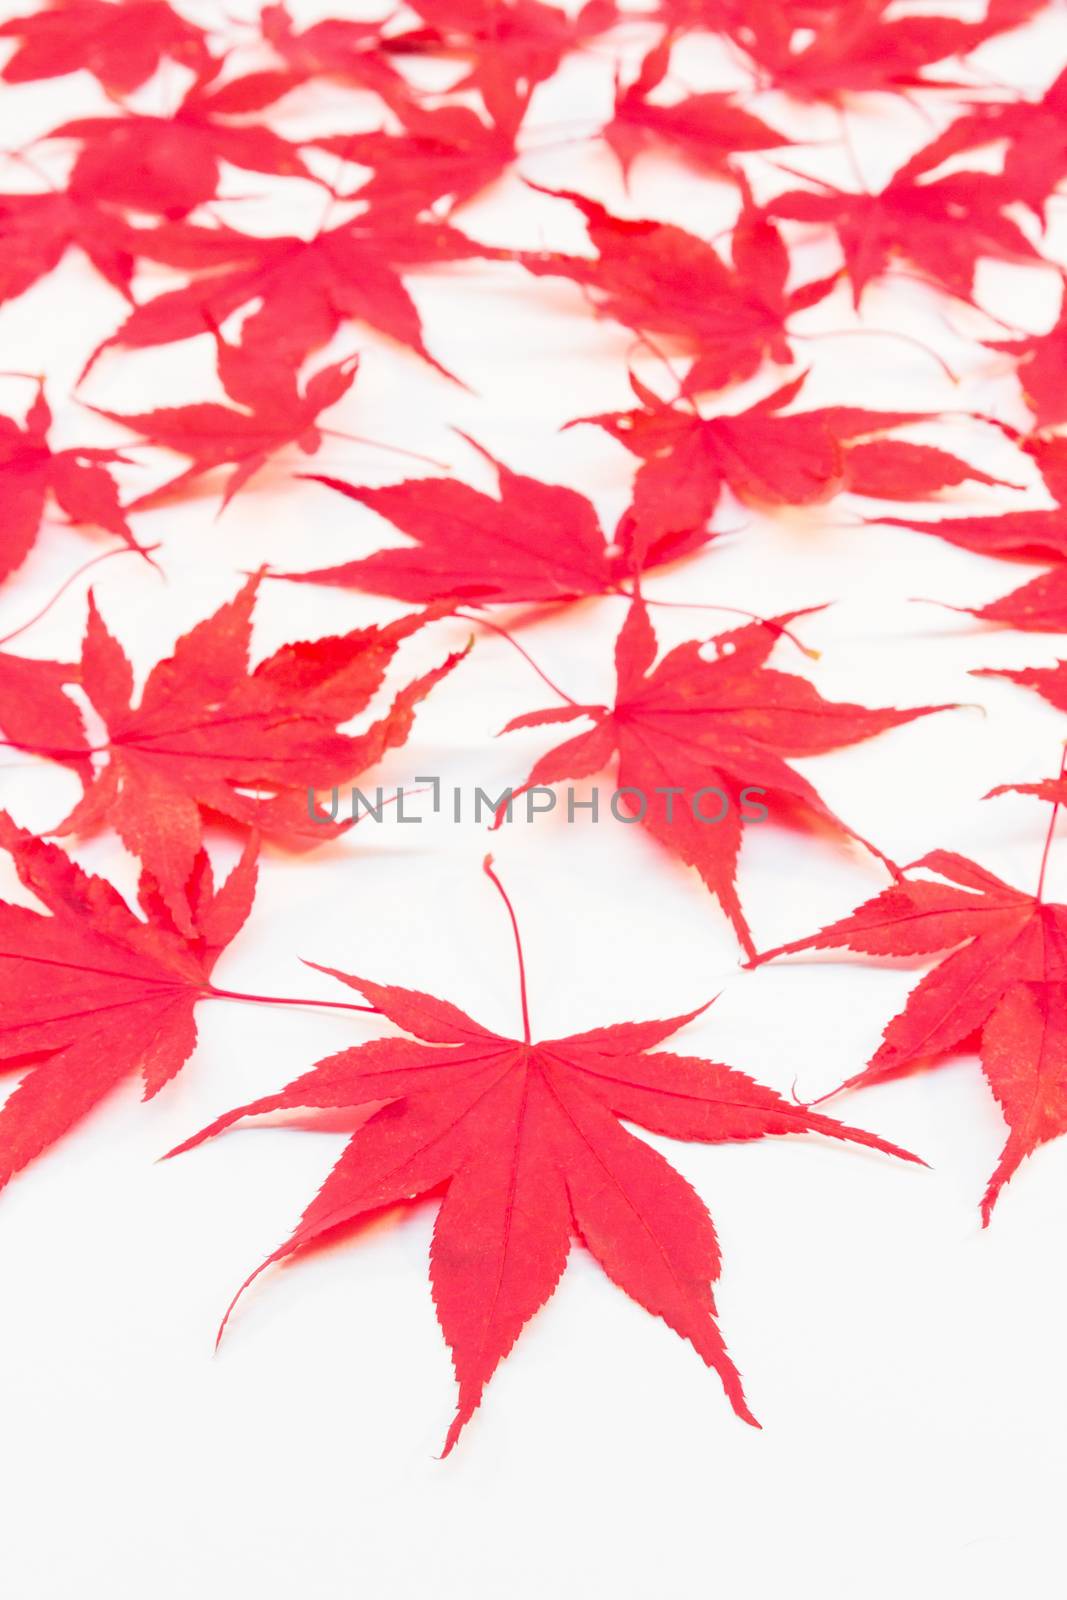 Red Acer leaves on white background by BenSchonewille